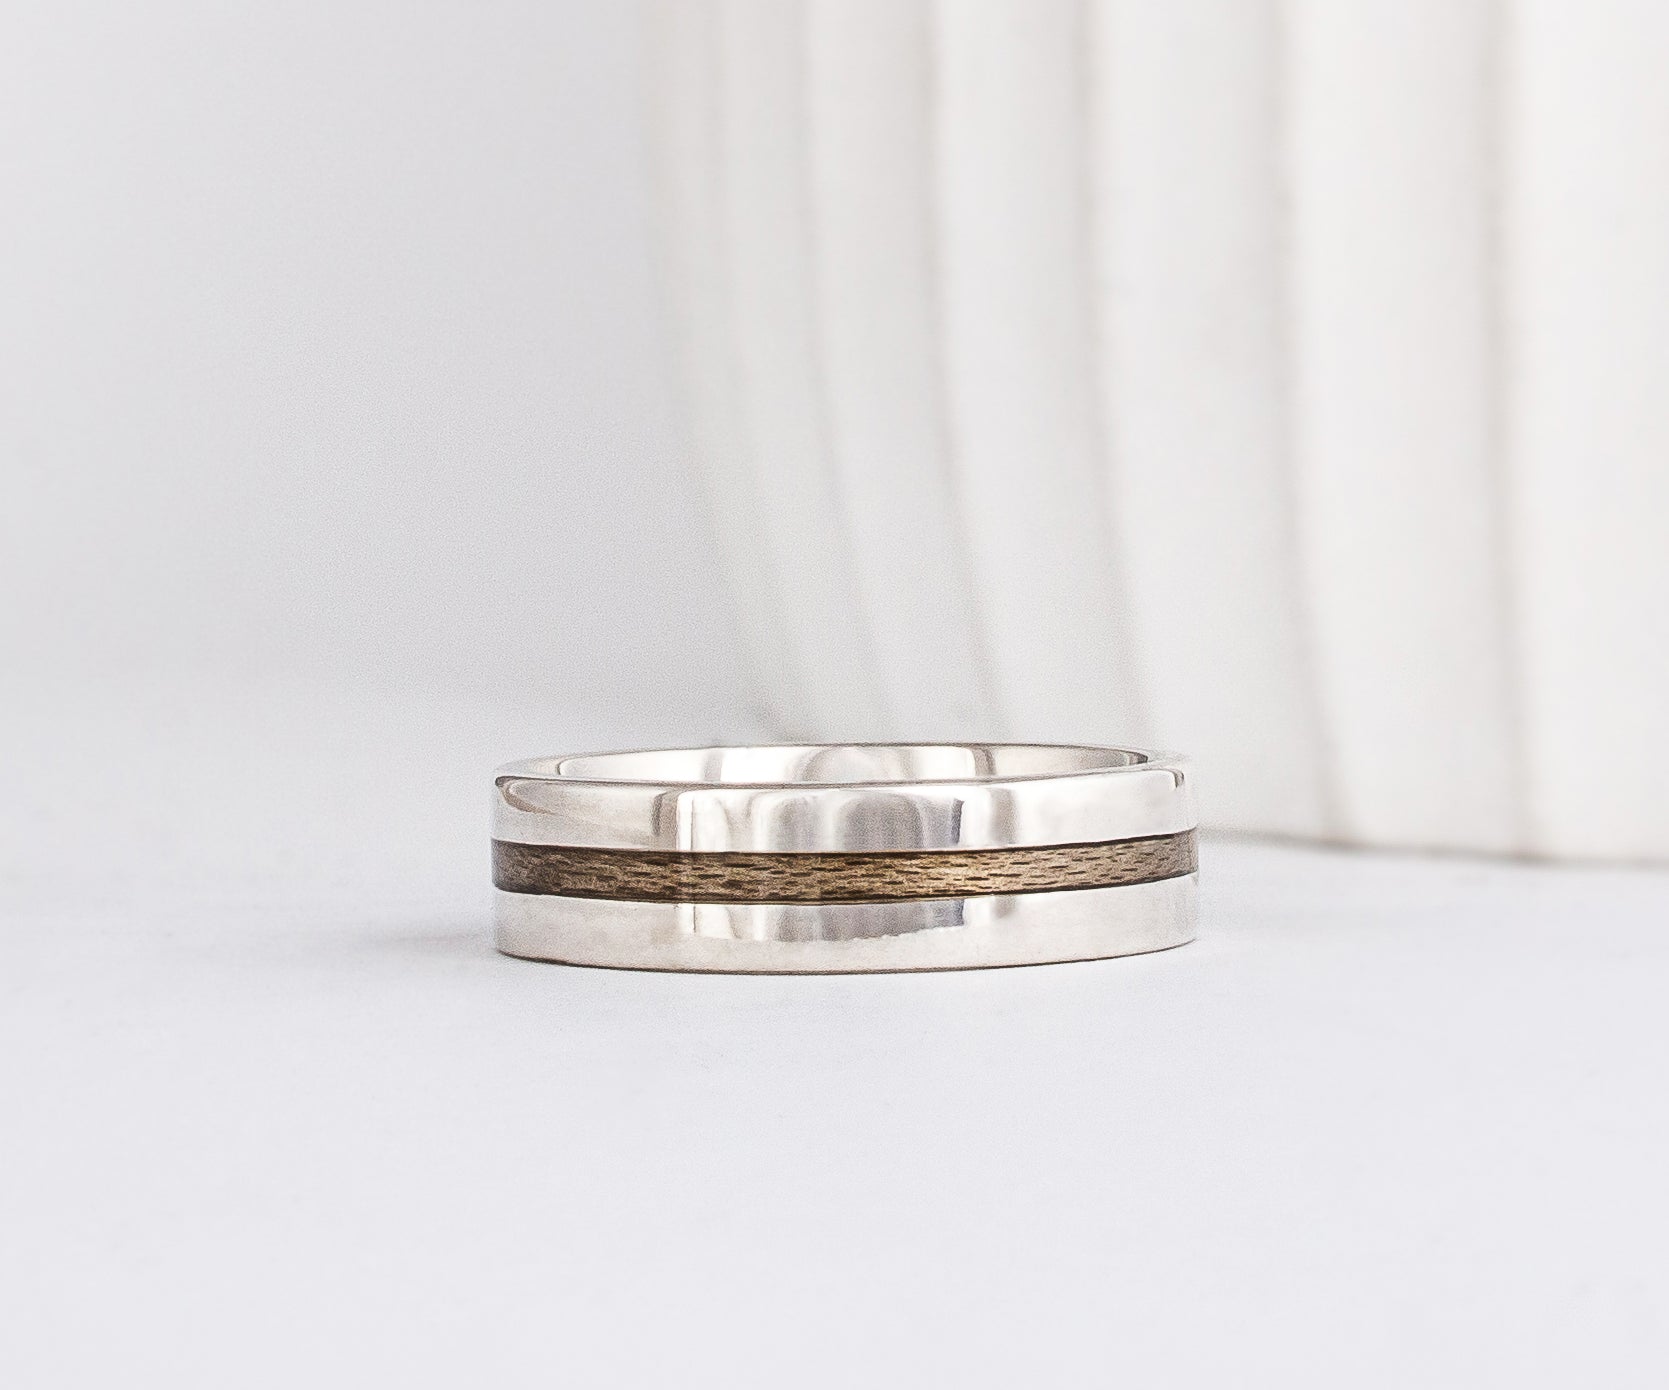 a modern wooden wedding ring for men or women featuring white gold, a flat profile and a central inlay of greyed Maplewood